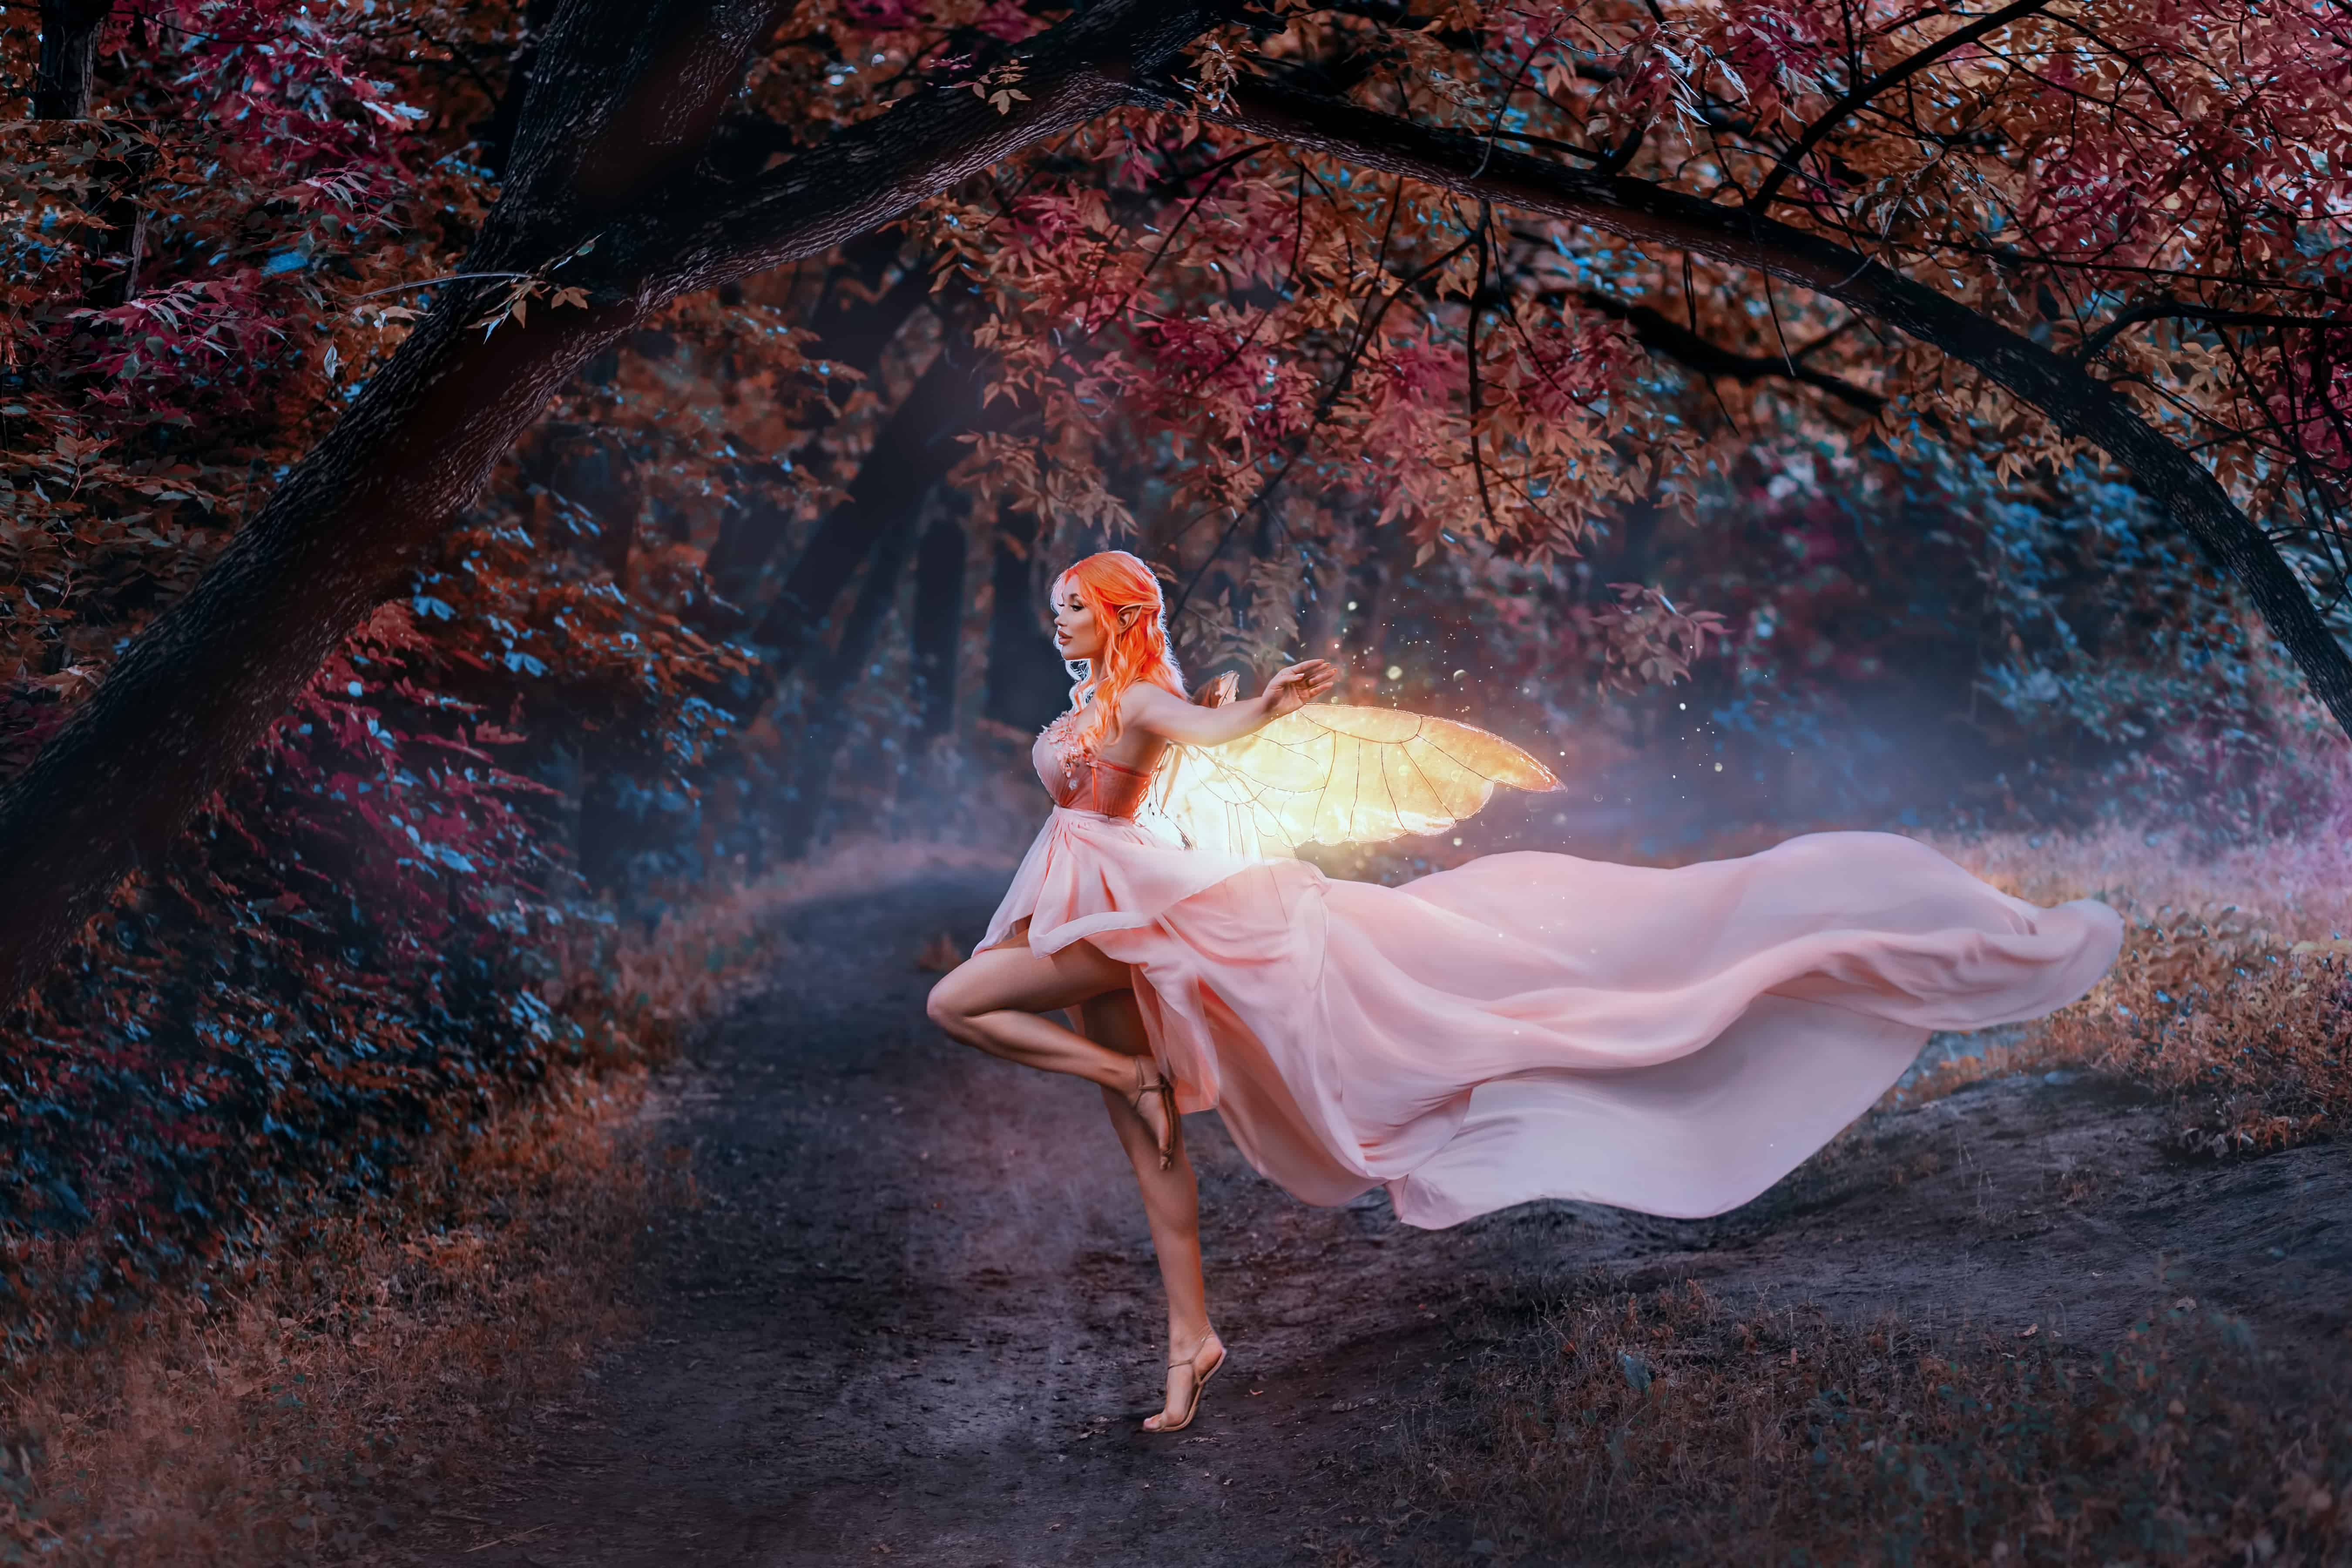 Portrait fantasy woman fairy, golden glowing butterfly wings. Pink dress silk train skirt waving fabric flies in wind. Night autumn forest orange trees. Sexy elf girl, red hair art creative clothes